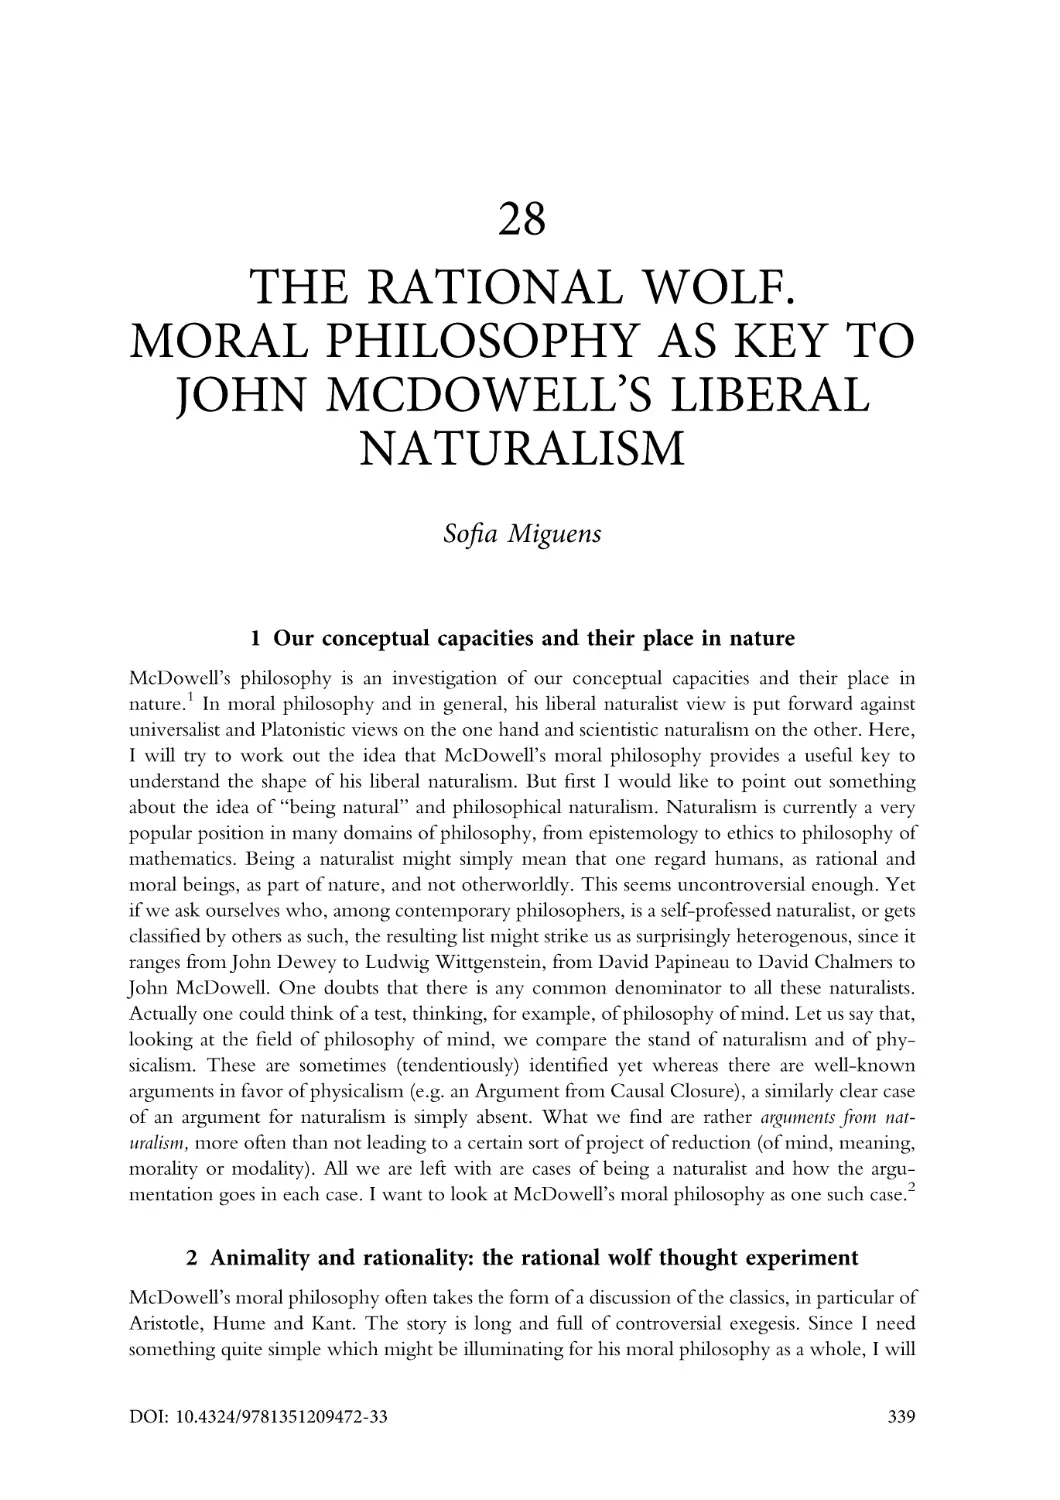 28. The rational wolf. Moral philosophy as key to John McDowell's liberal naturalism
1. Our conceptual capacities and their place in nature
2. Animality and rationality